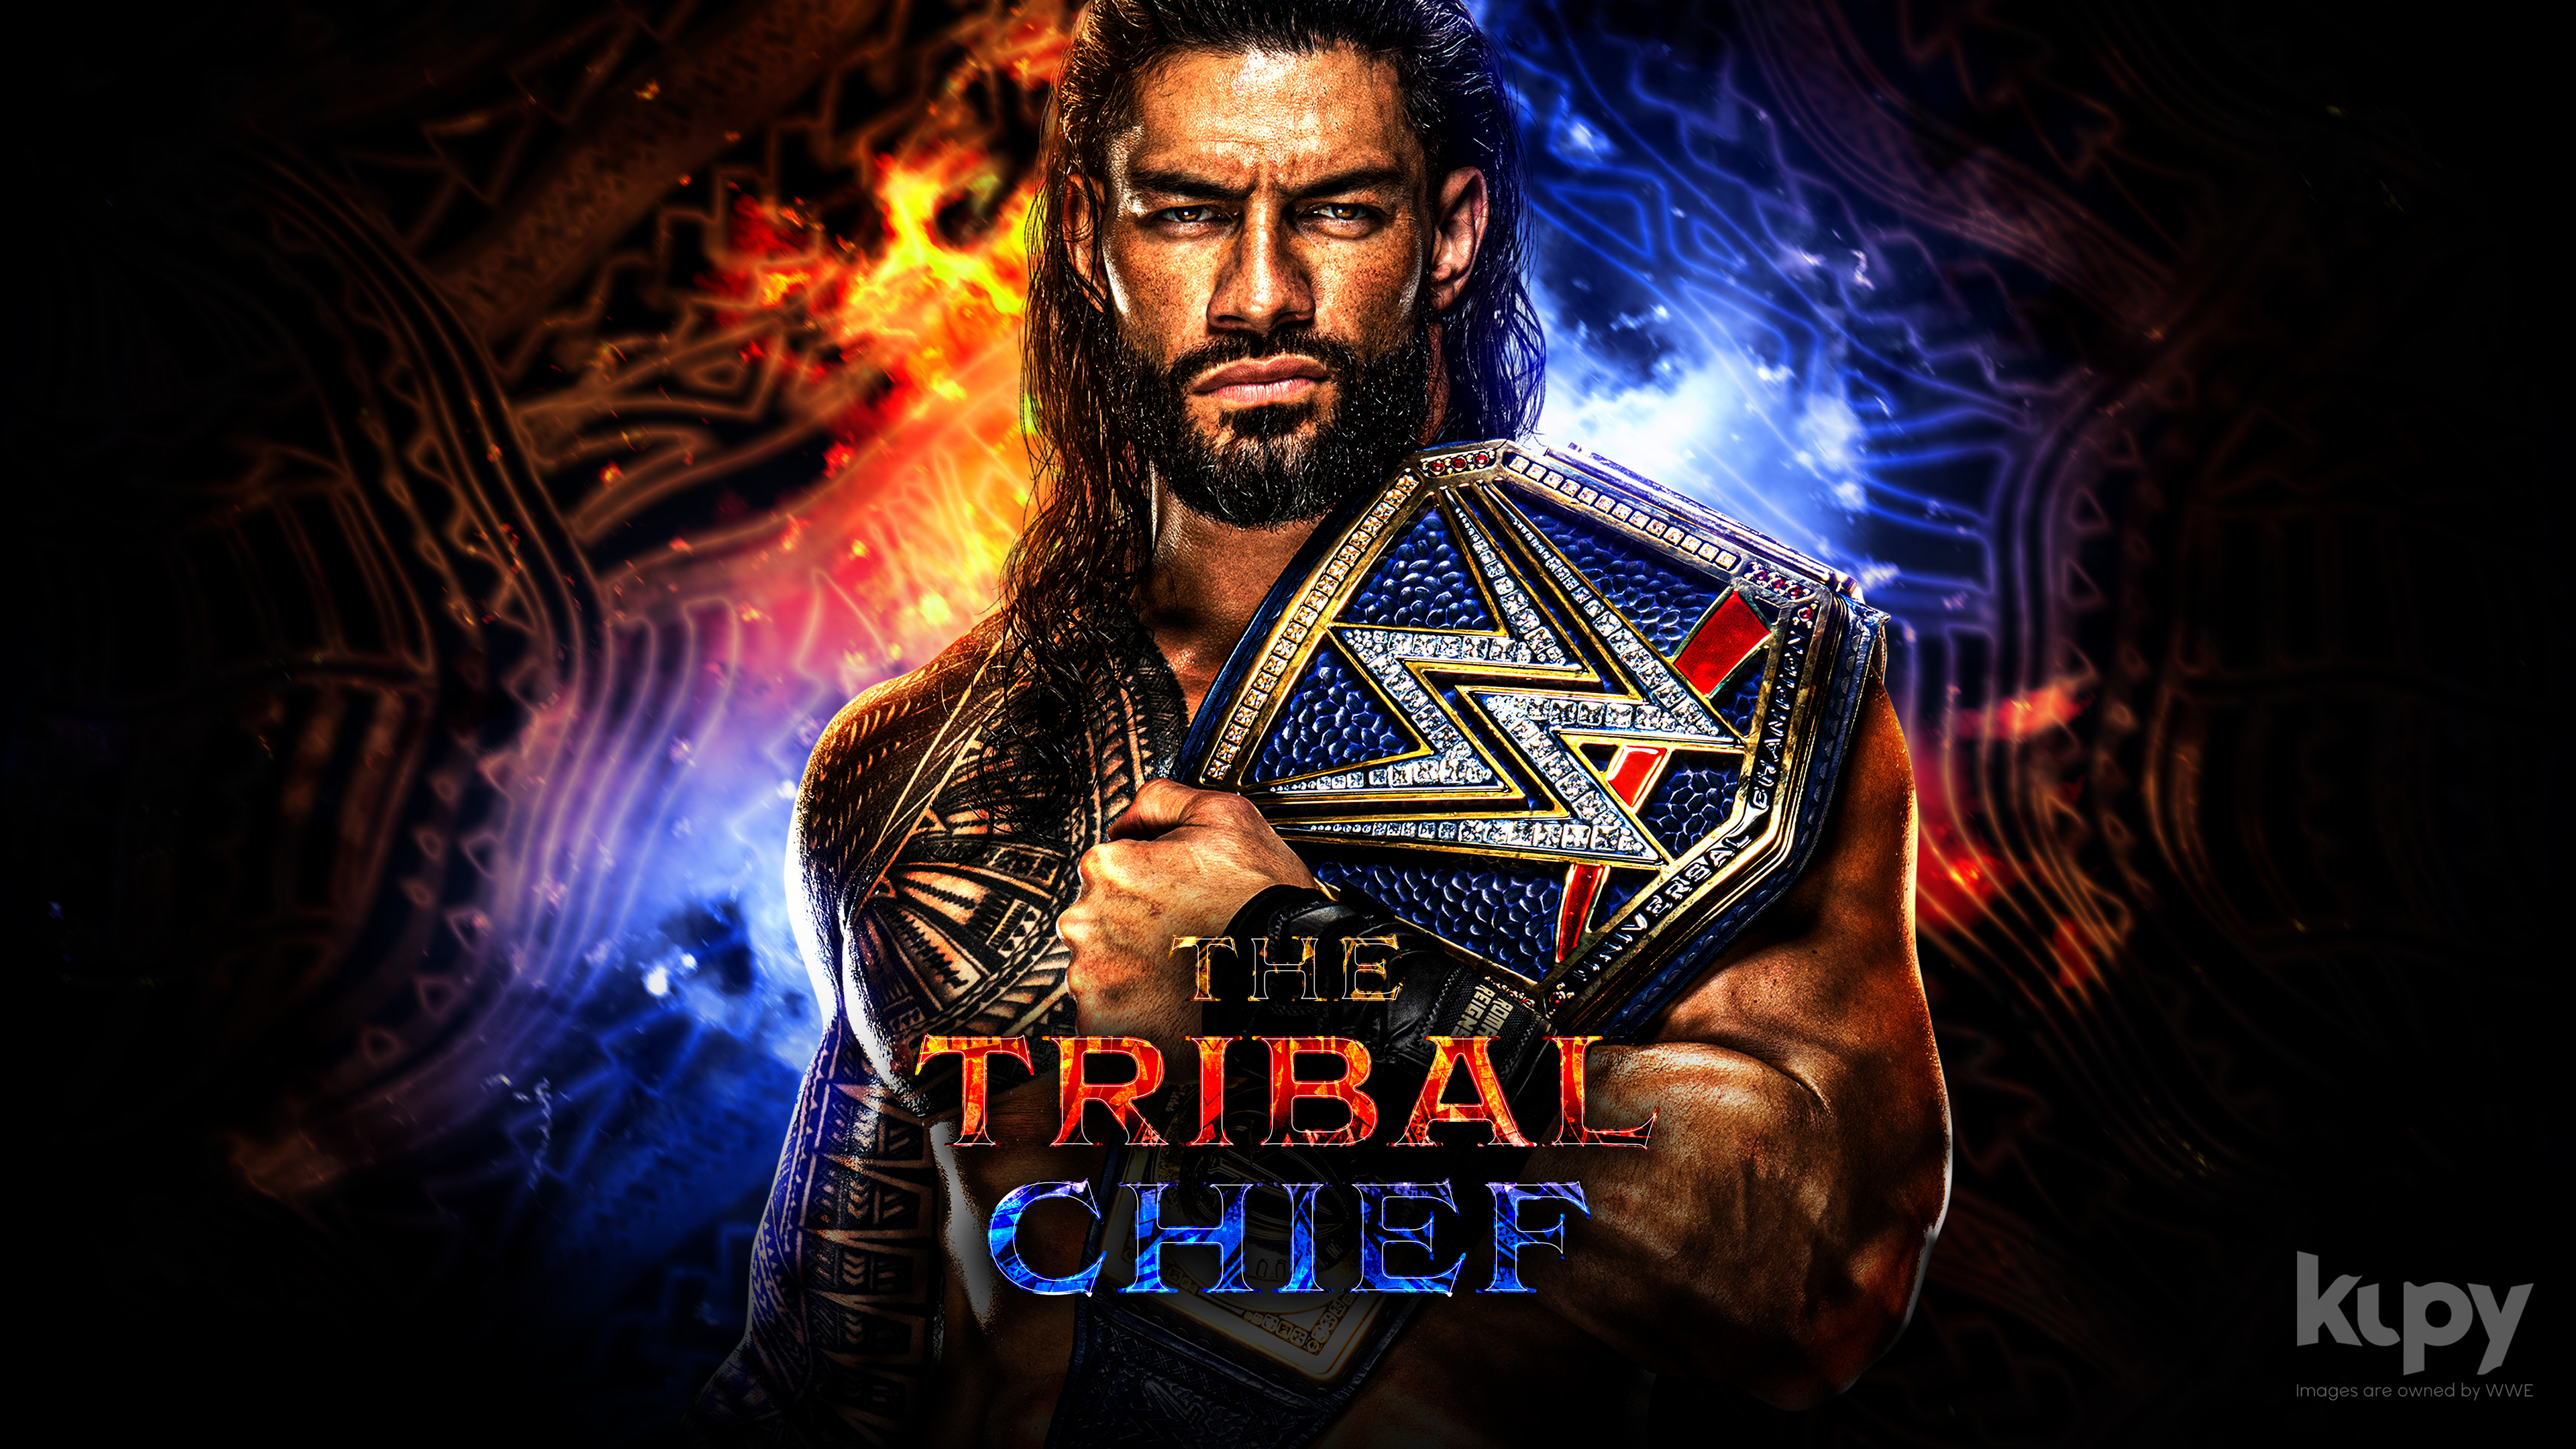 NEW The Tribal Chief Roman Reigns wallpaper! - Kupy Wrestling Wallpapers